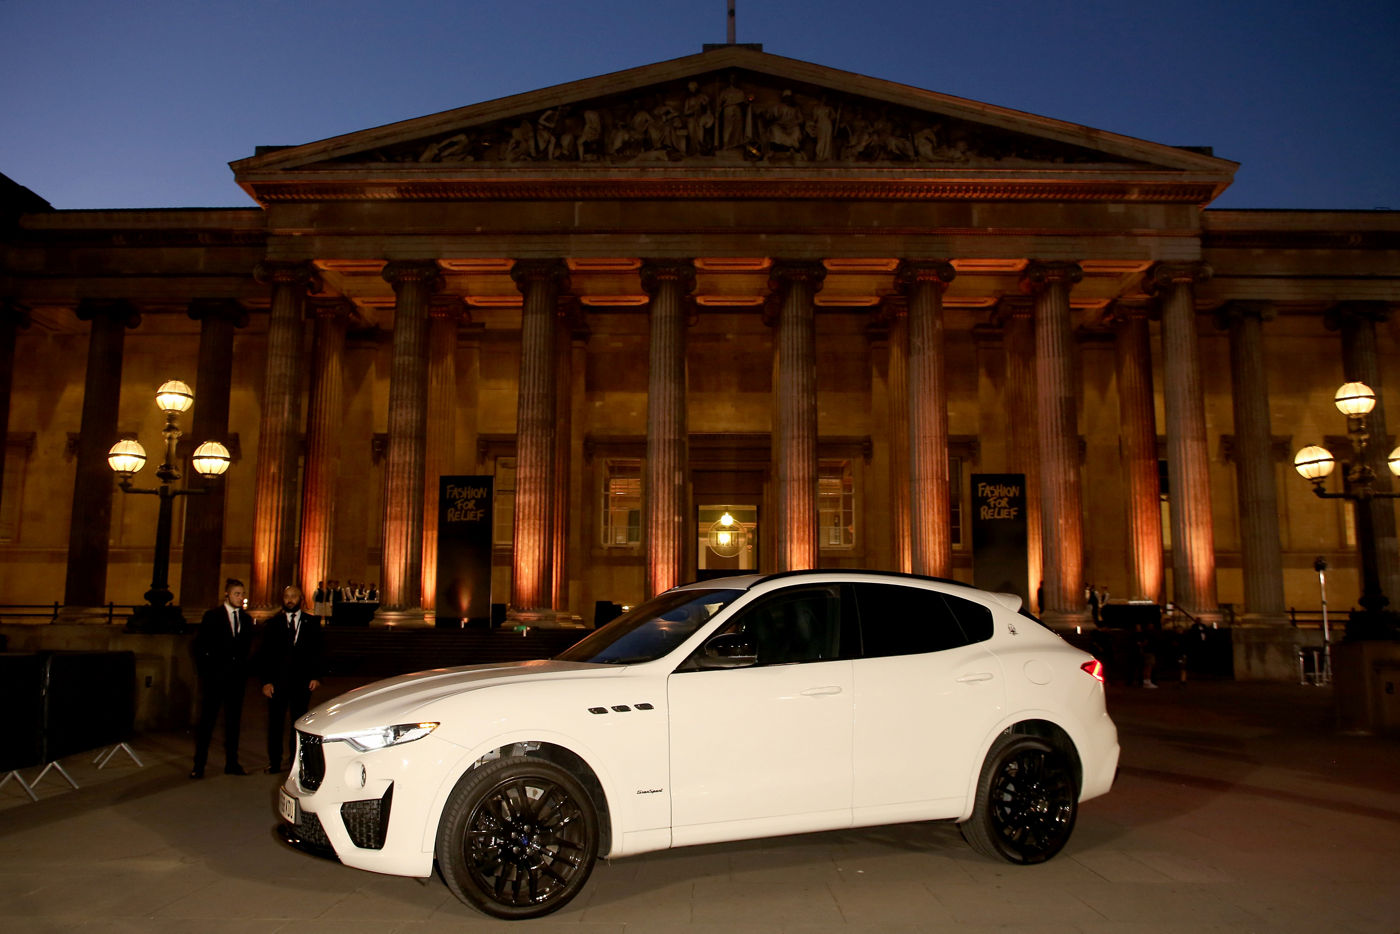 Maserati-Levante-chauffeurs-VIPs-to-Fashion-For-Relief-at-The-British-Museum-on-September-14,-2019-in-London-in-England